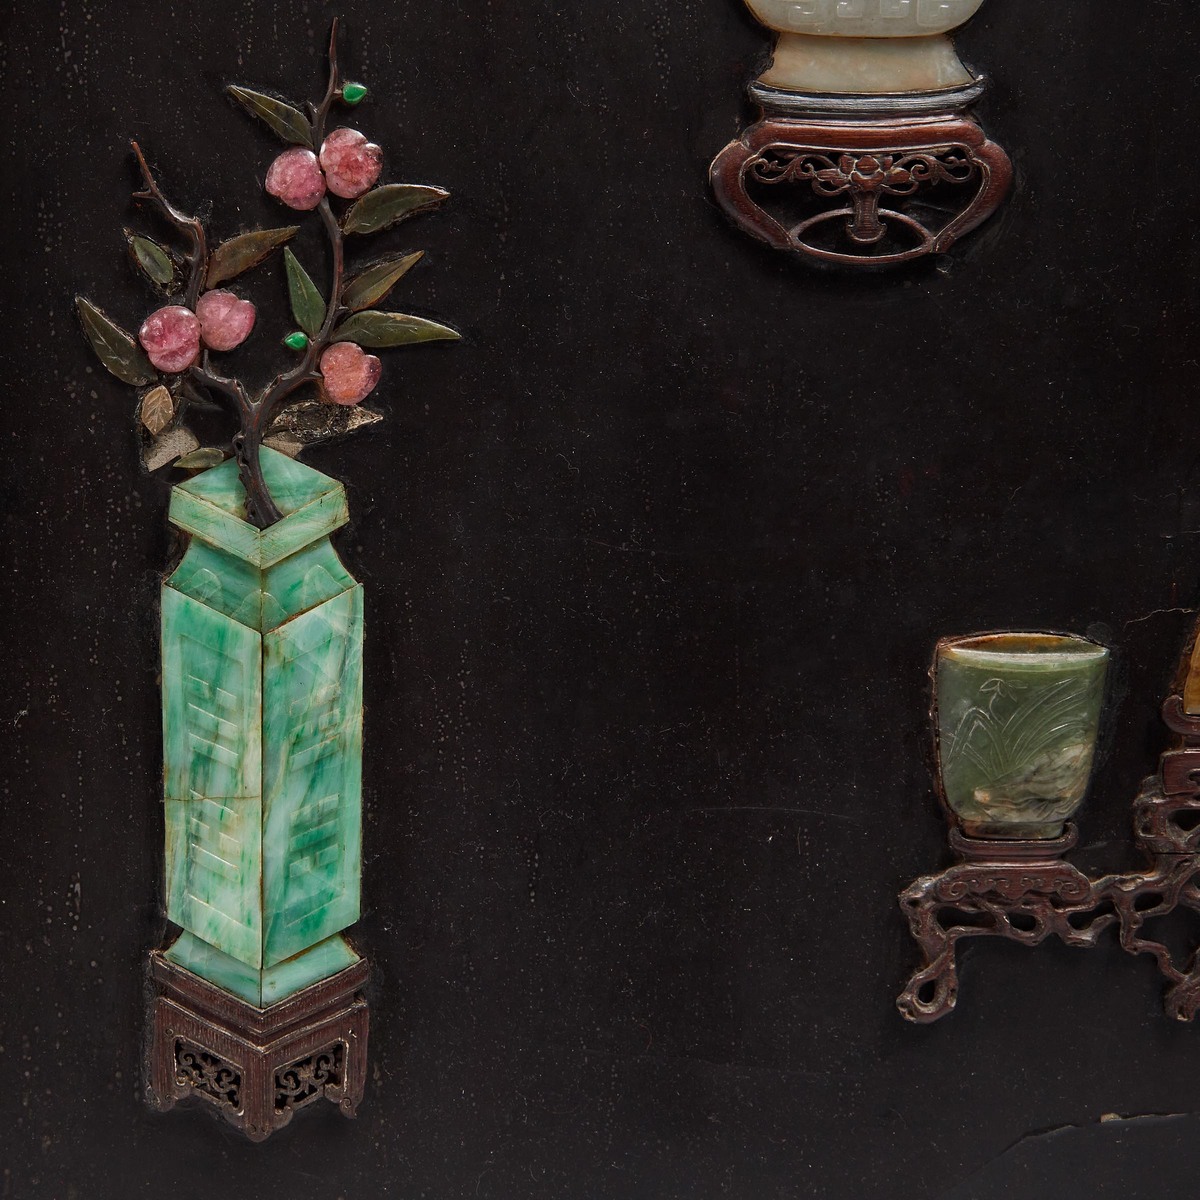 A Pair of Jade-Inlaid 'Hundred Antiques' Panels, Late Qing Dynasty, 19th Century, 清 十九世纪 黑漆嵌宝大挂屏一对, - Image 5 of 11